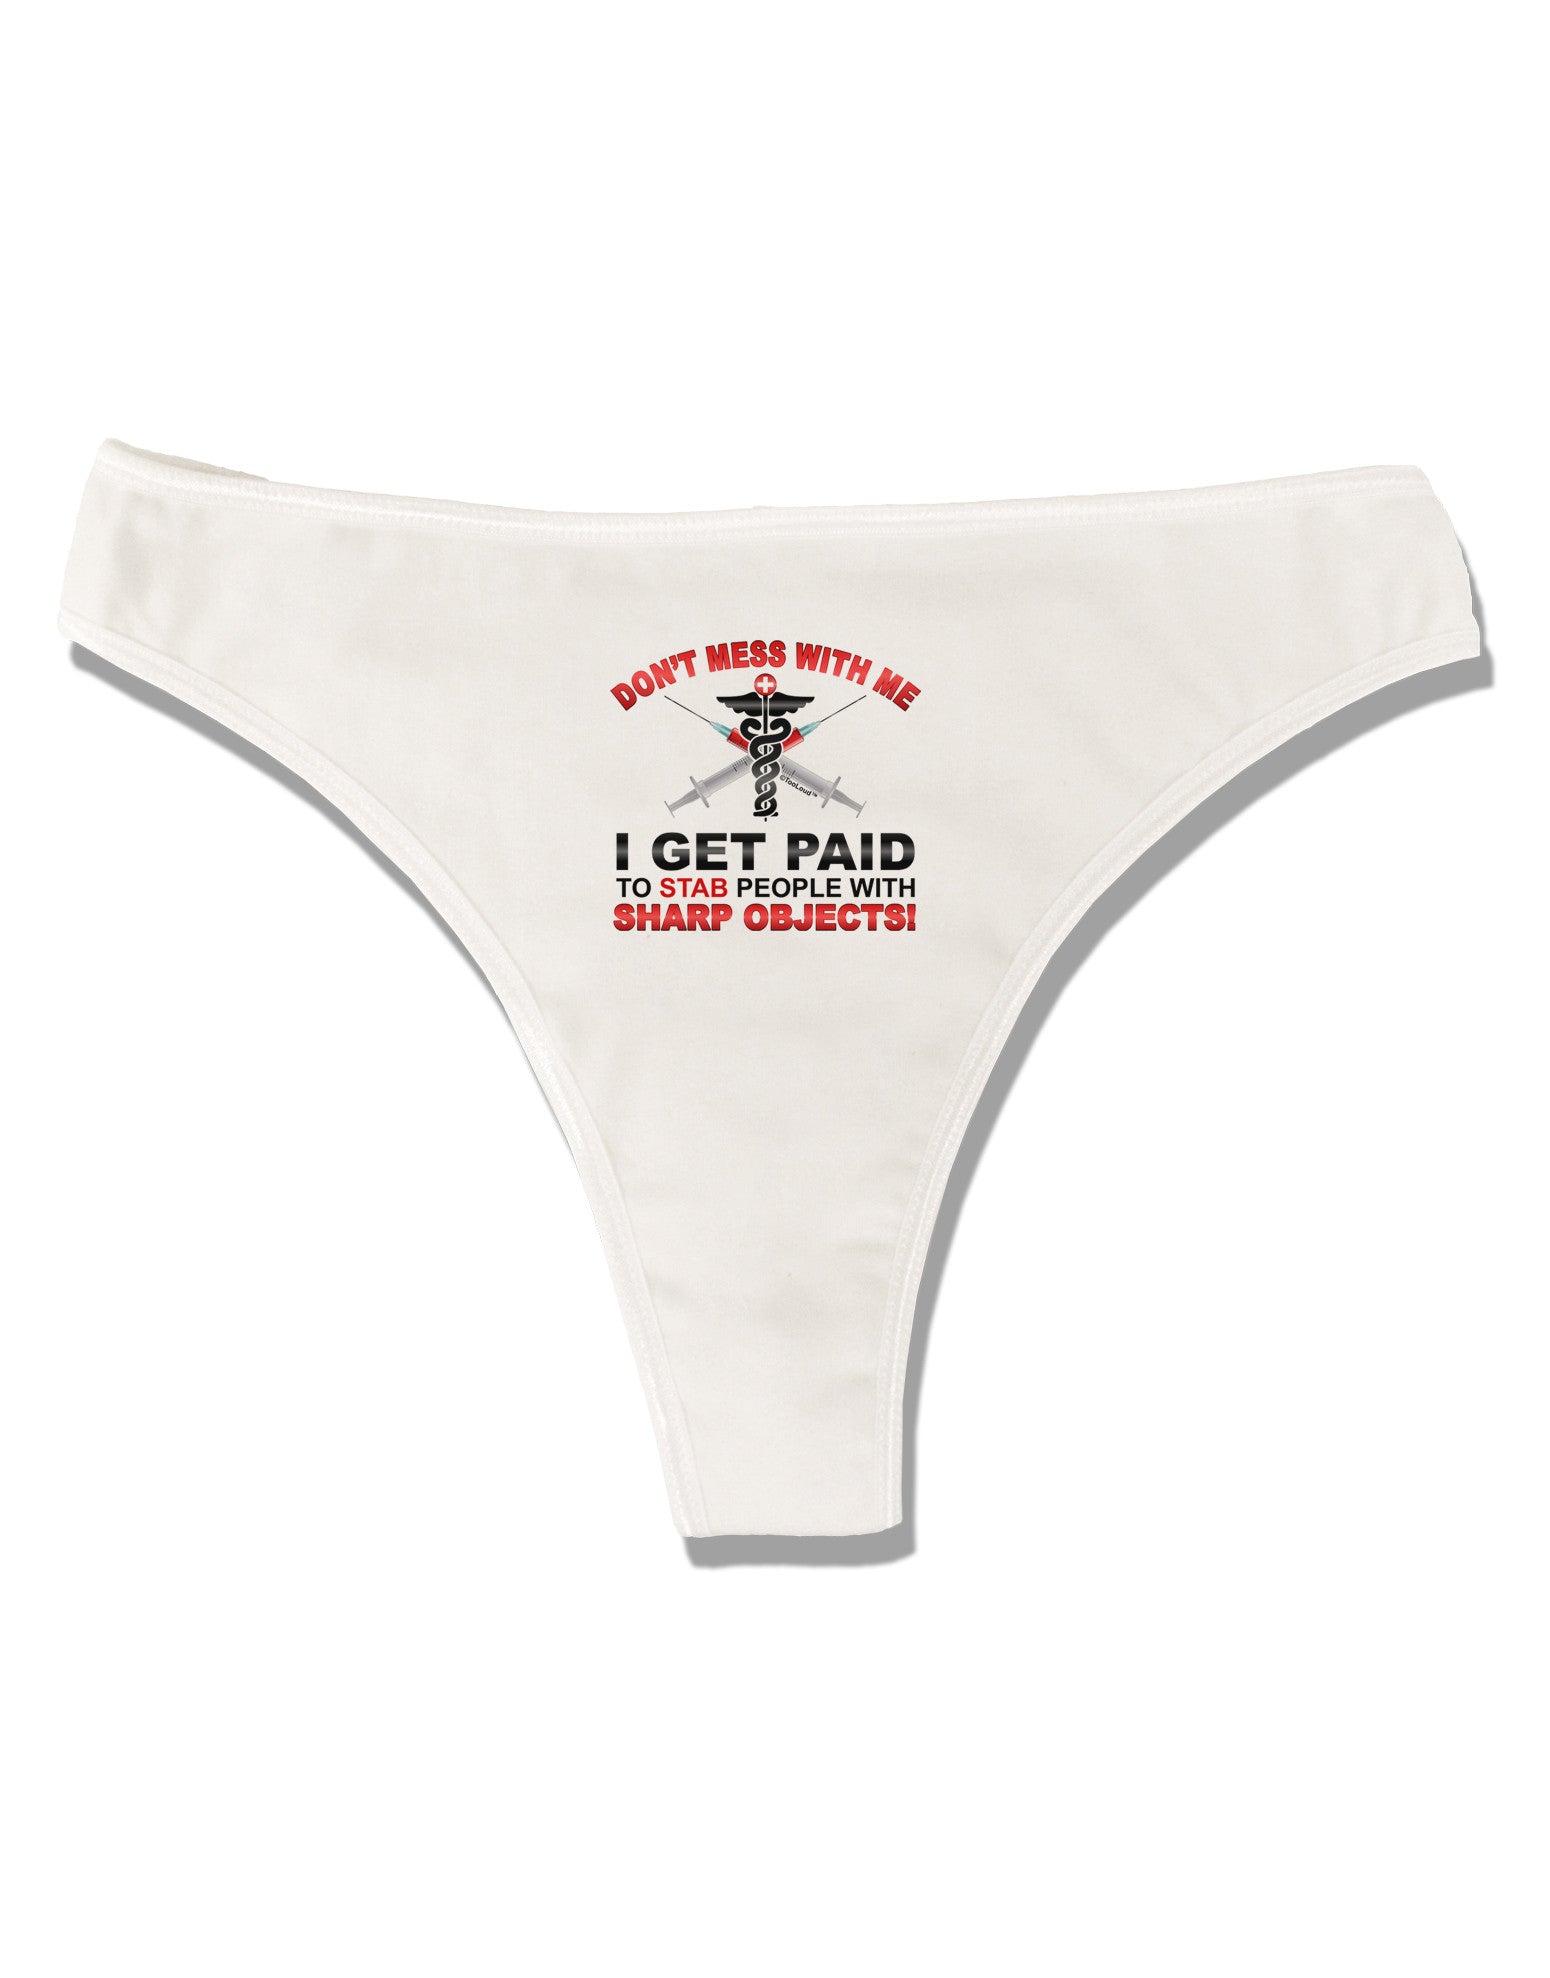 Nurse - Don't Mess With Me Womens Thong Underwear